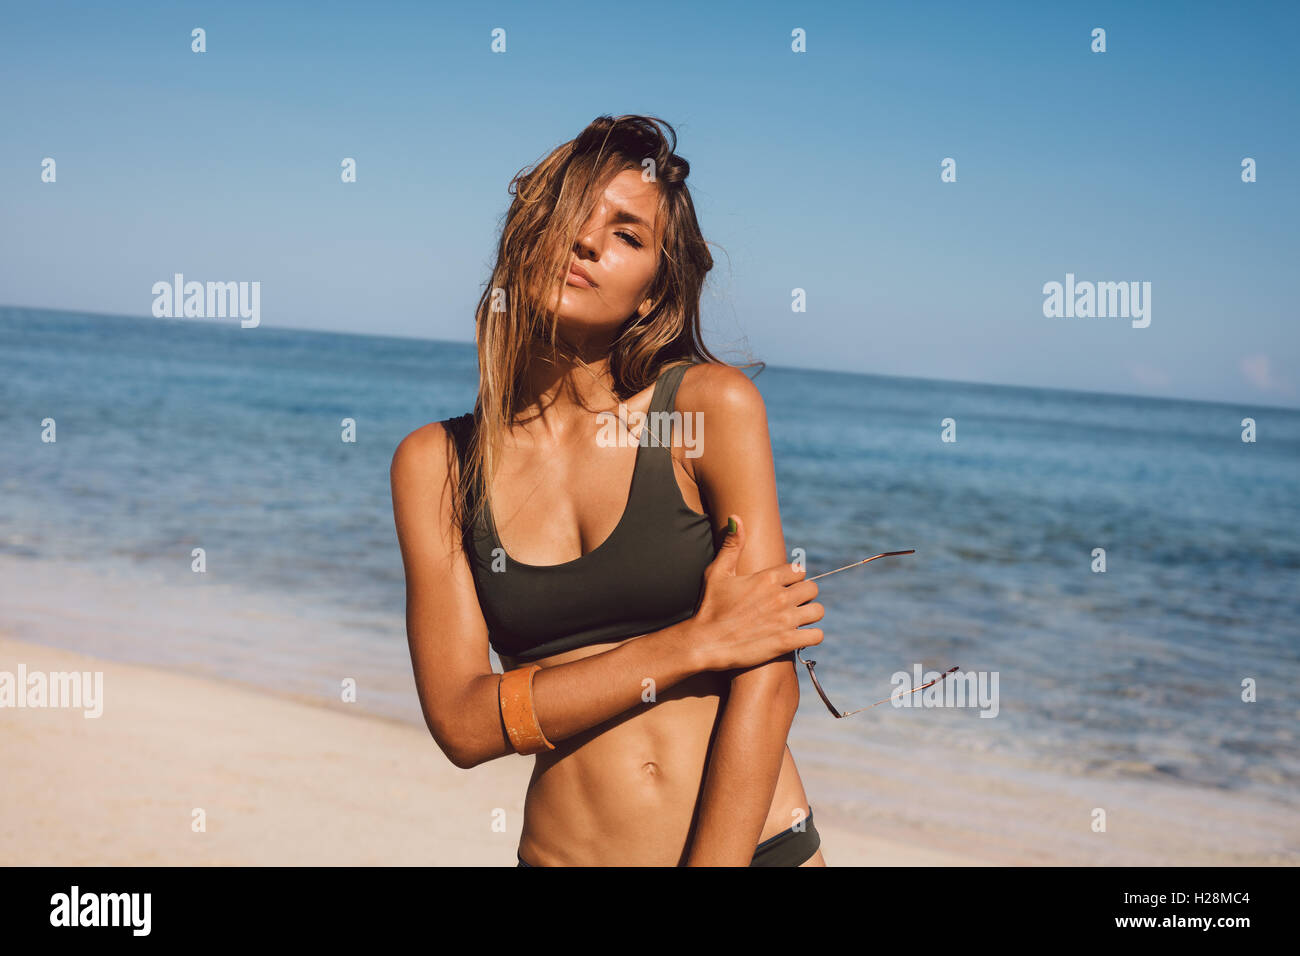 Portrait of sensuous young woman in bikini on the beach. Female model posing in swimsuit on the sea shore. Stock Photo